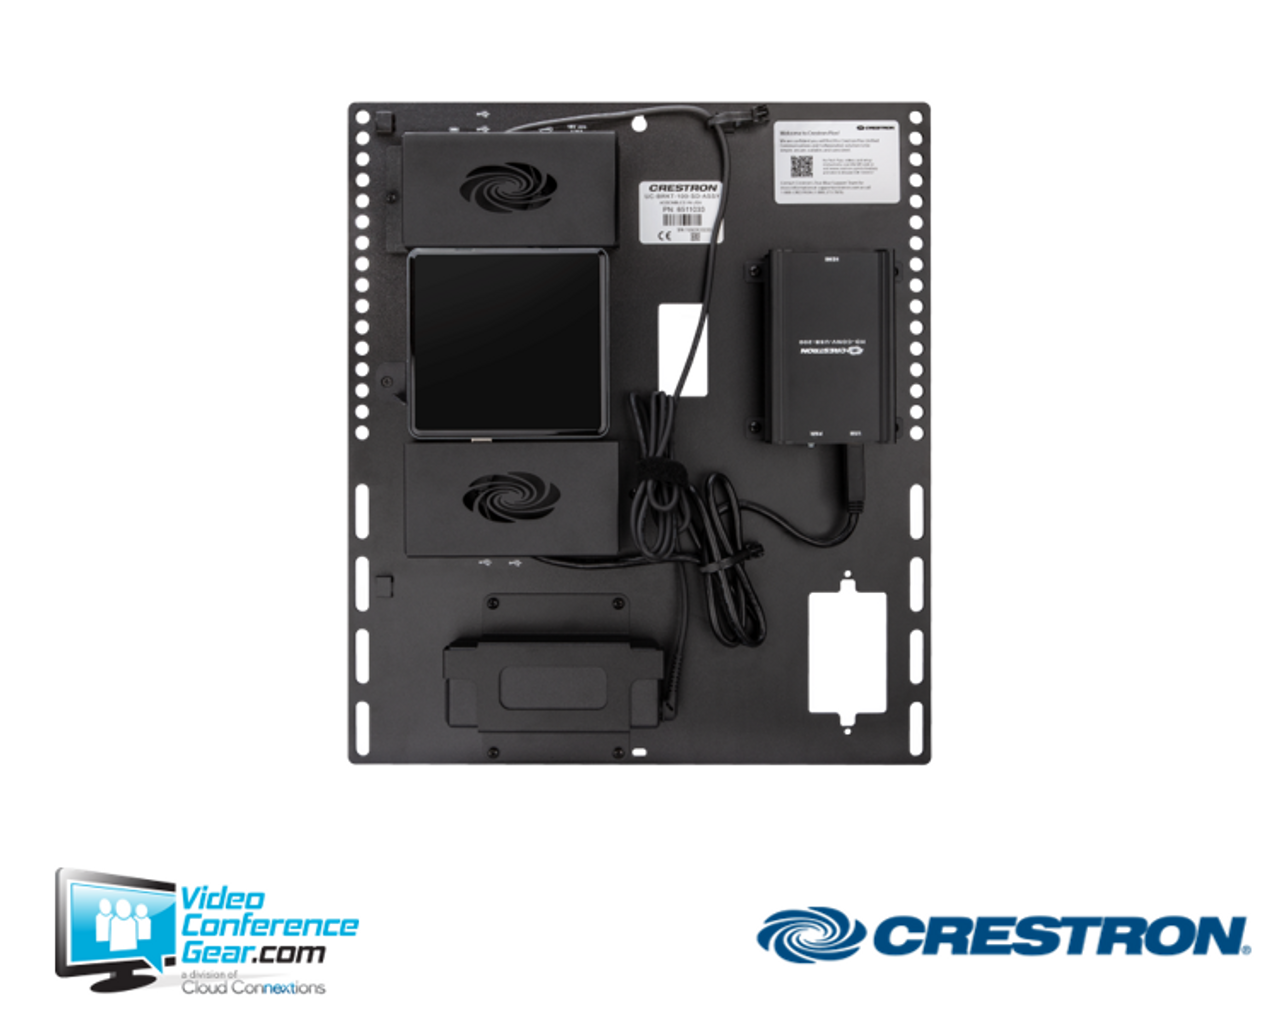 Crestron Flex Advanced Tabletop Medium Room Video Conference System for Microsoft Teams® Rooms (UC-MX50-T)